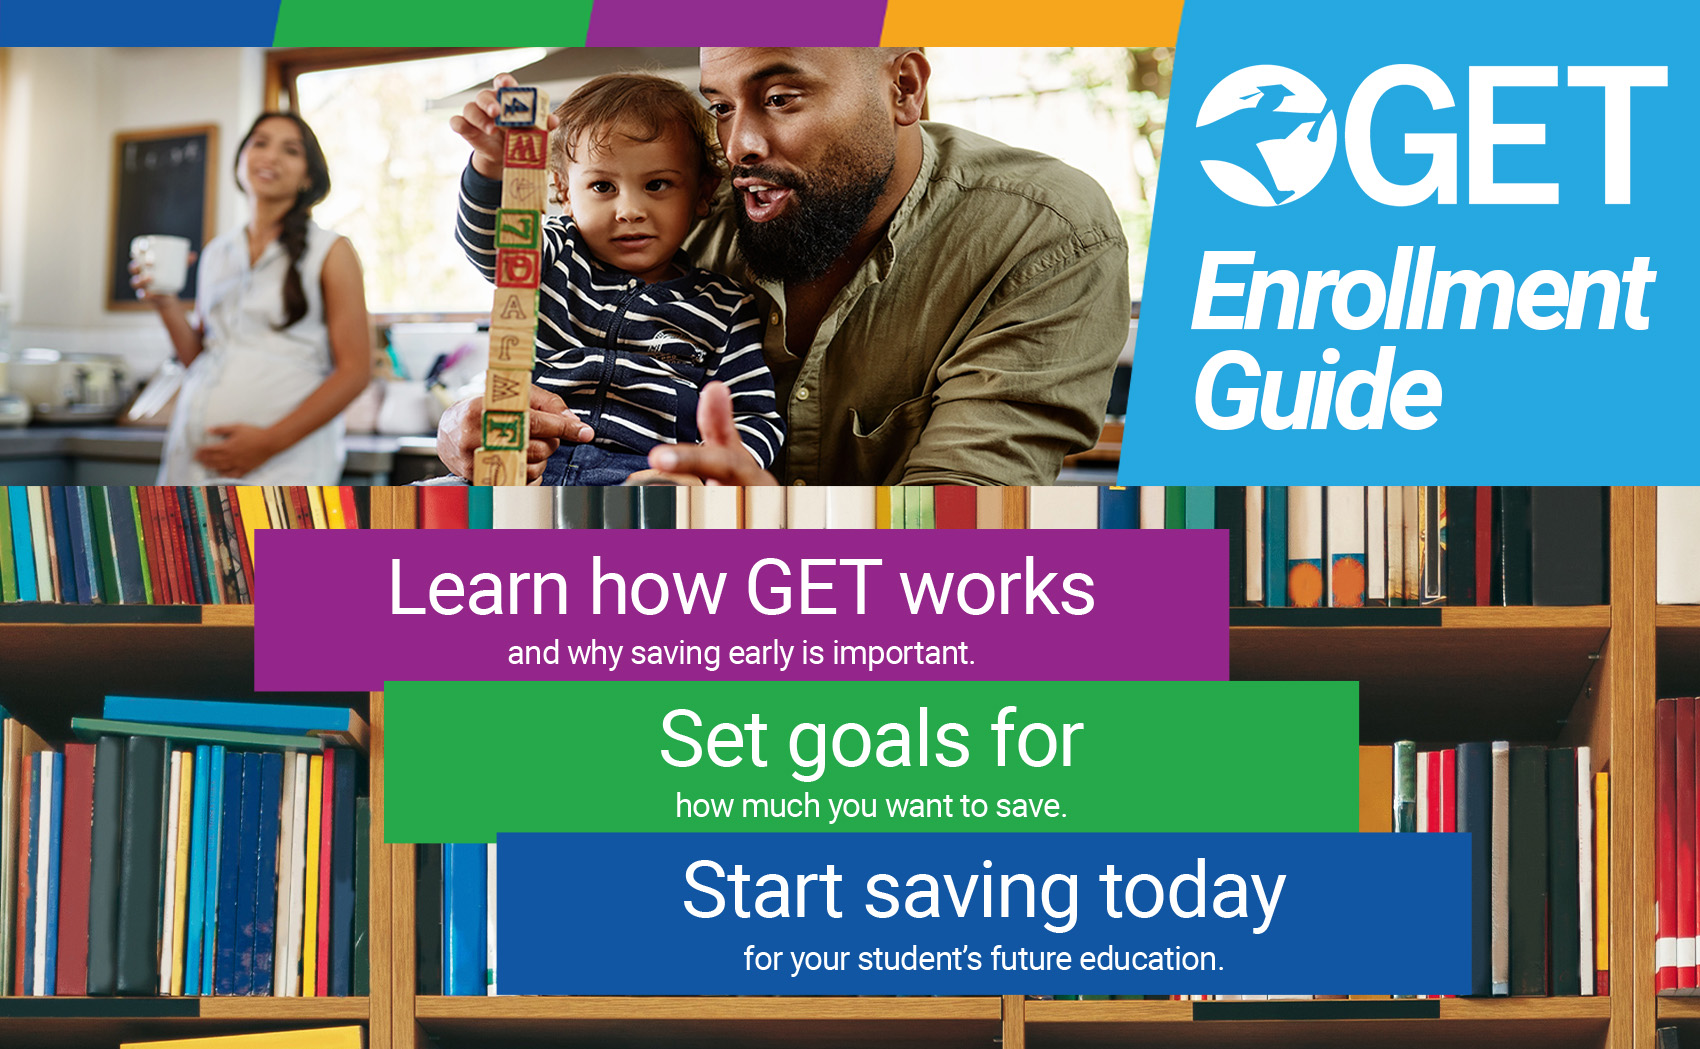 GET Enrollment Guide - Learn how GET works and why saving early is important. Set goals for how much you want to save. Start saving today for your student’s future education.